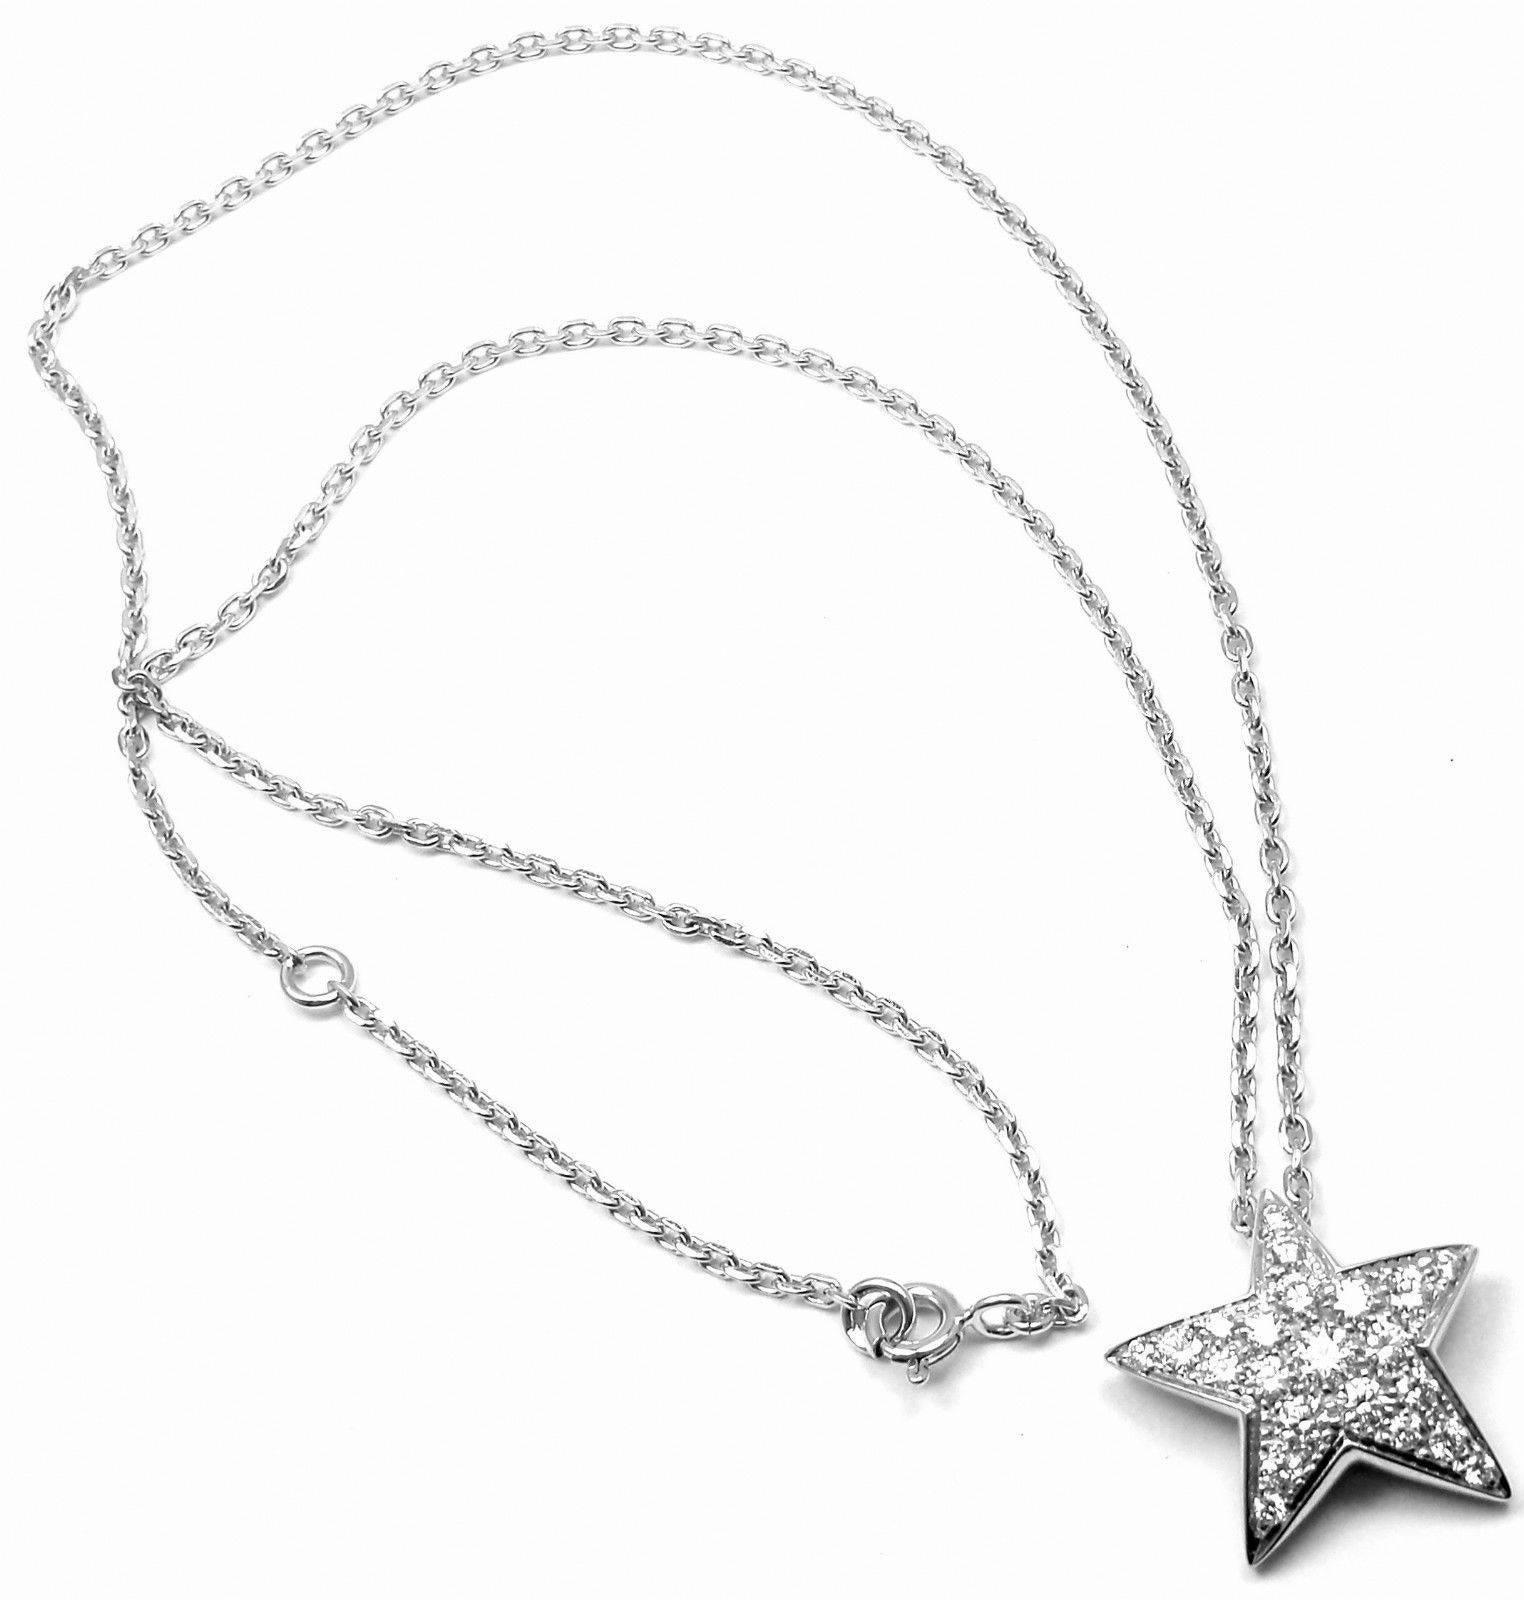 18k White Gold Diamond Comete Large Star Pendant Necklace by Chanel.
With 22 Diamonds, VVS1 Clarity, F Color. Total Diamond Weight: .80CT. 

Details:
Length: 16